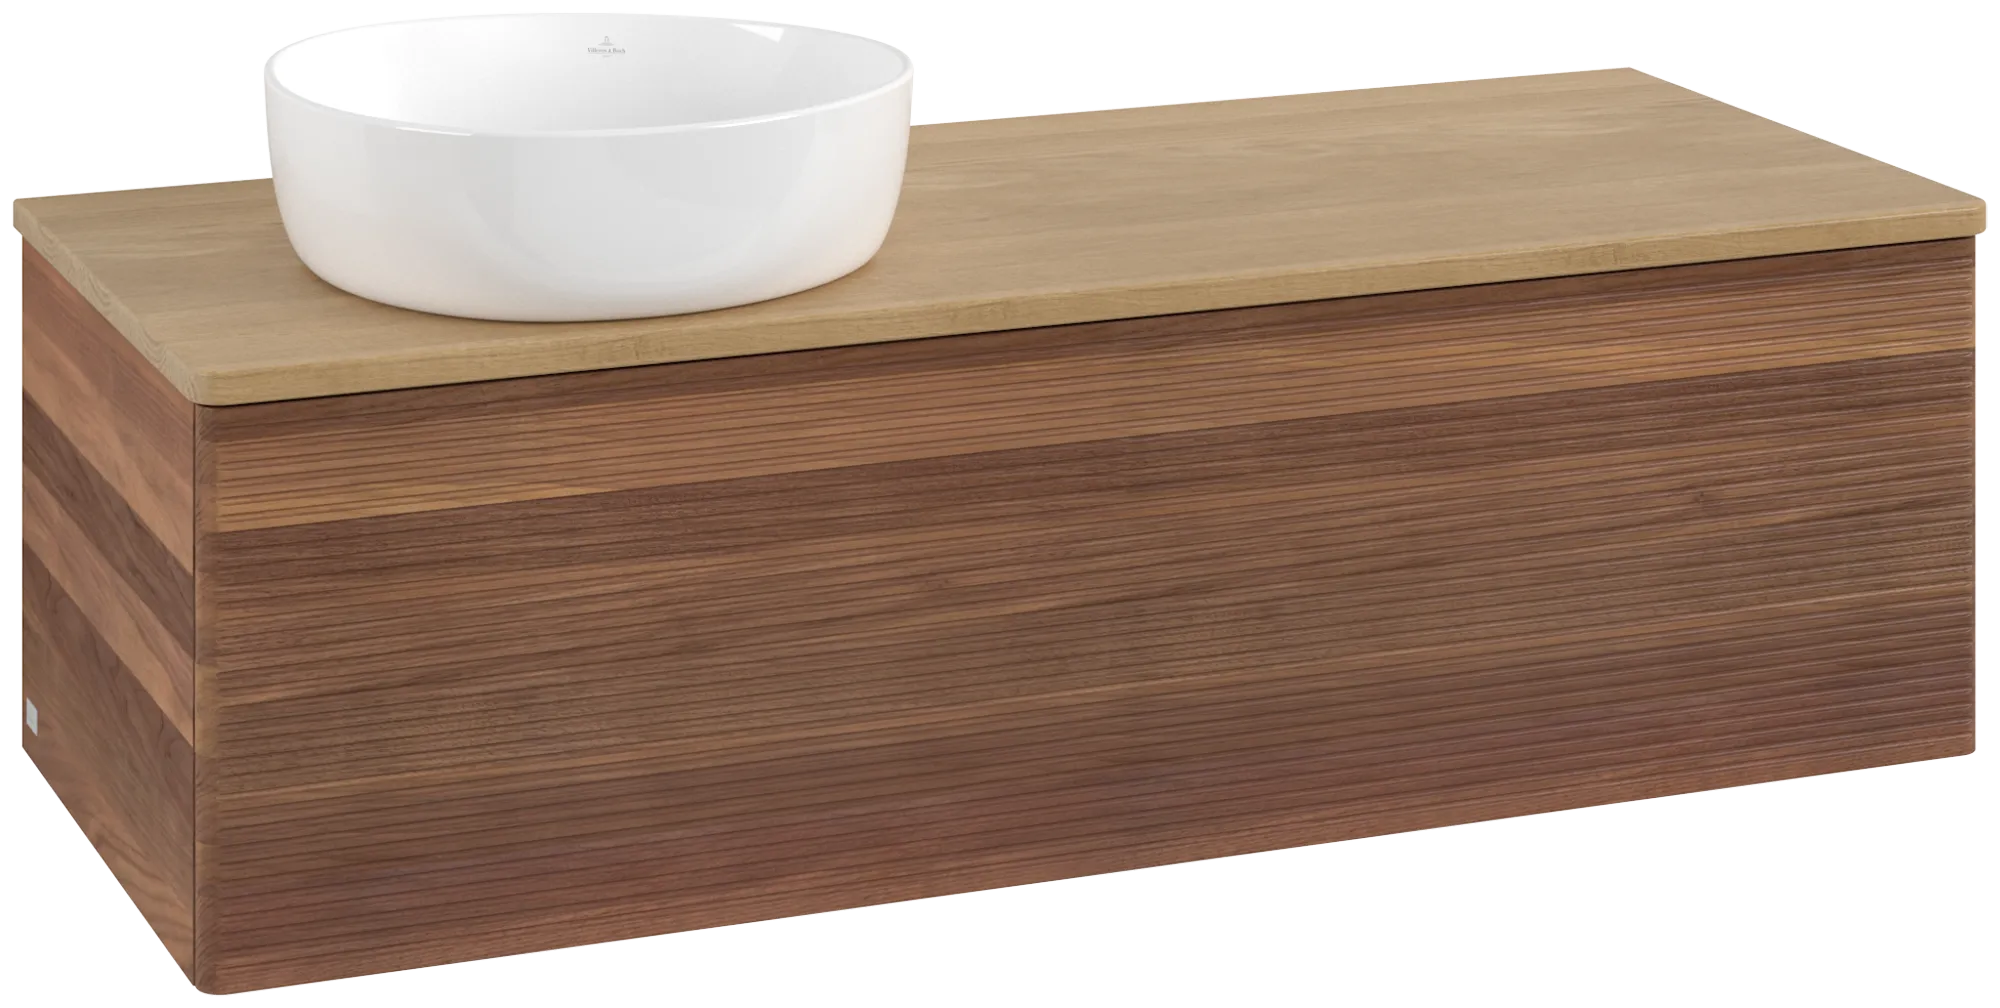 VILLEROY BOCH Antao Vanity unit, 1 pull-out compartment, 1200 x 360 x 500 mm, Front with grain texture, Warm Walnut / Honey Oak #K33111HM resmi